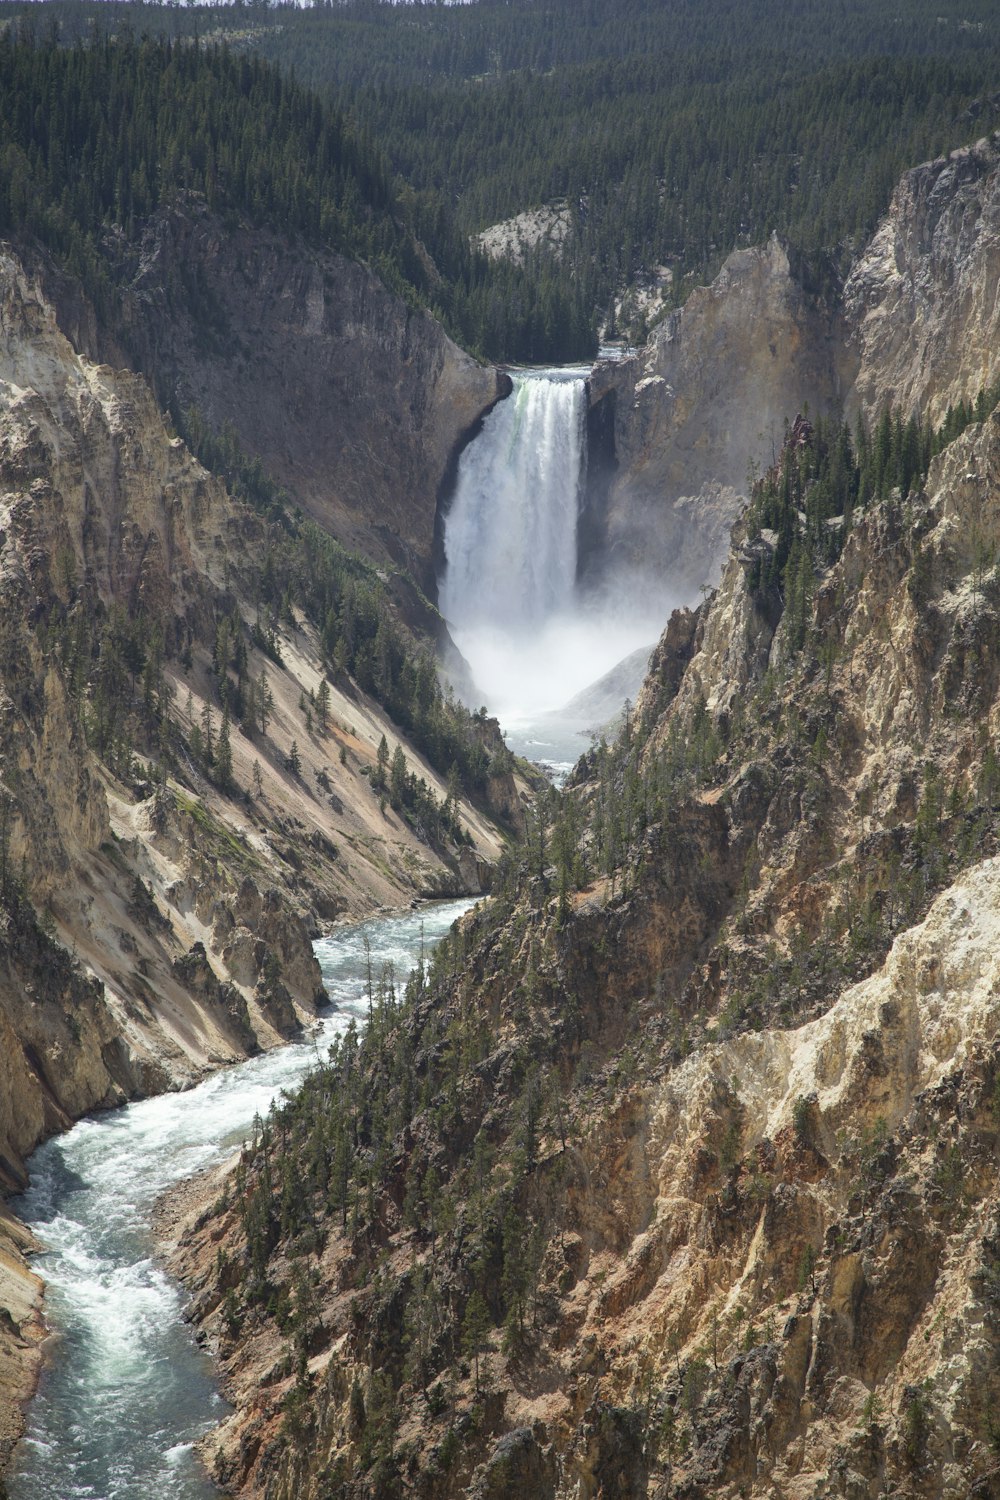 water falls between brown and gray rocky mountain